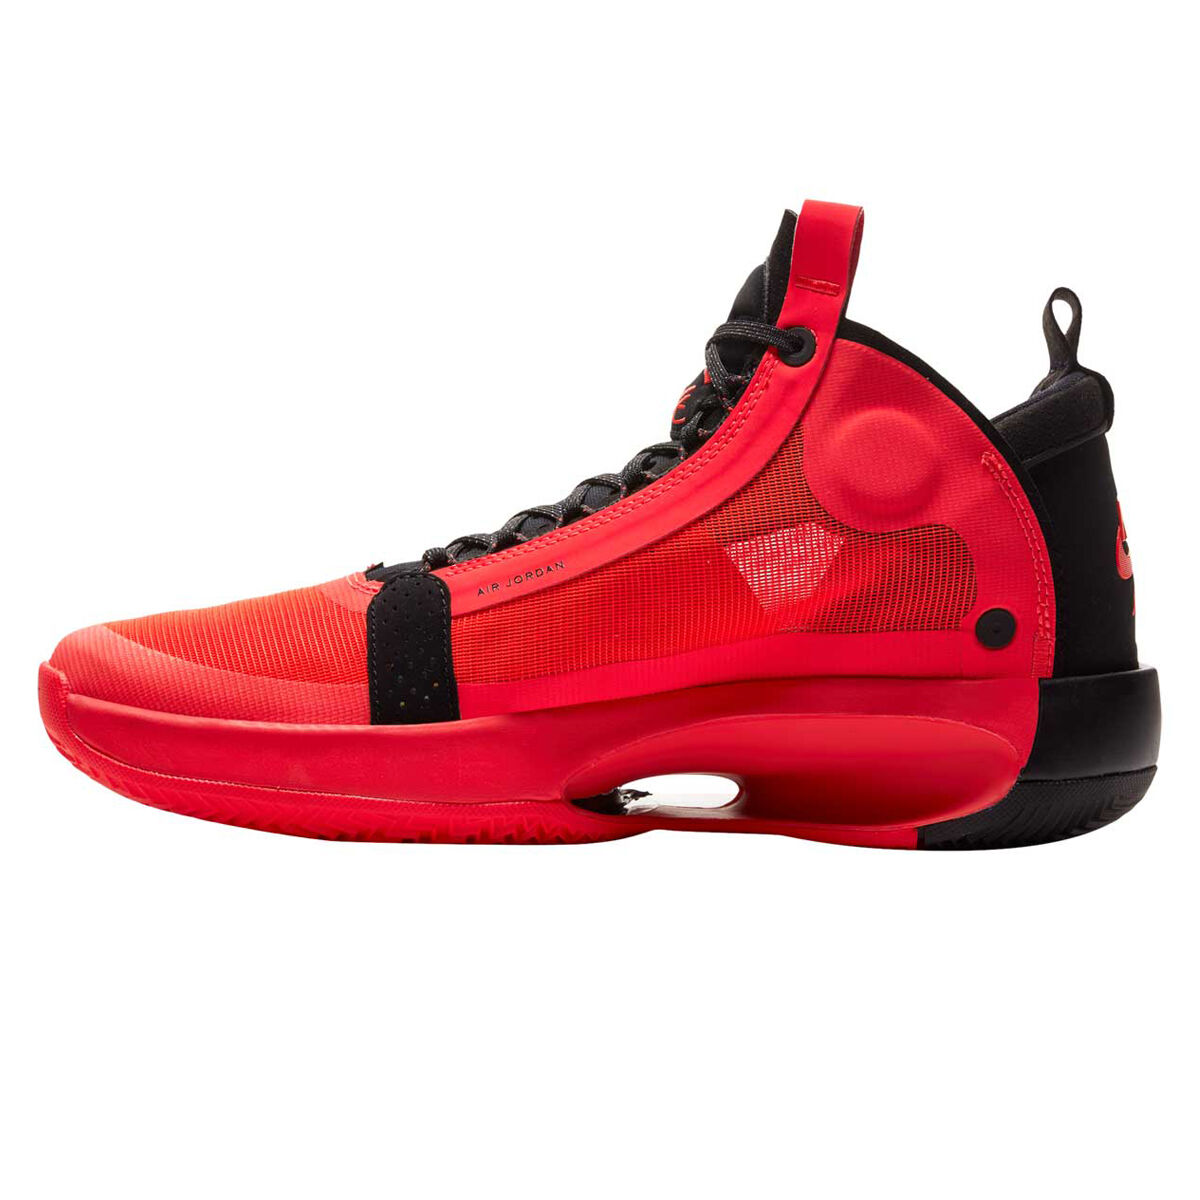 red and black jordan basketball shoes